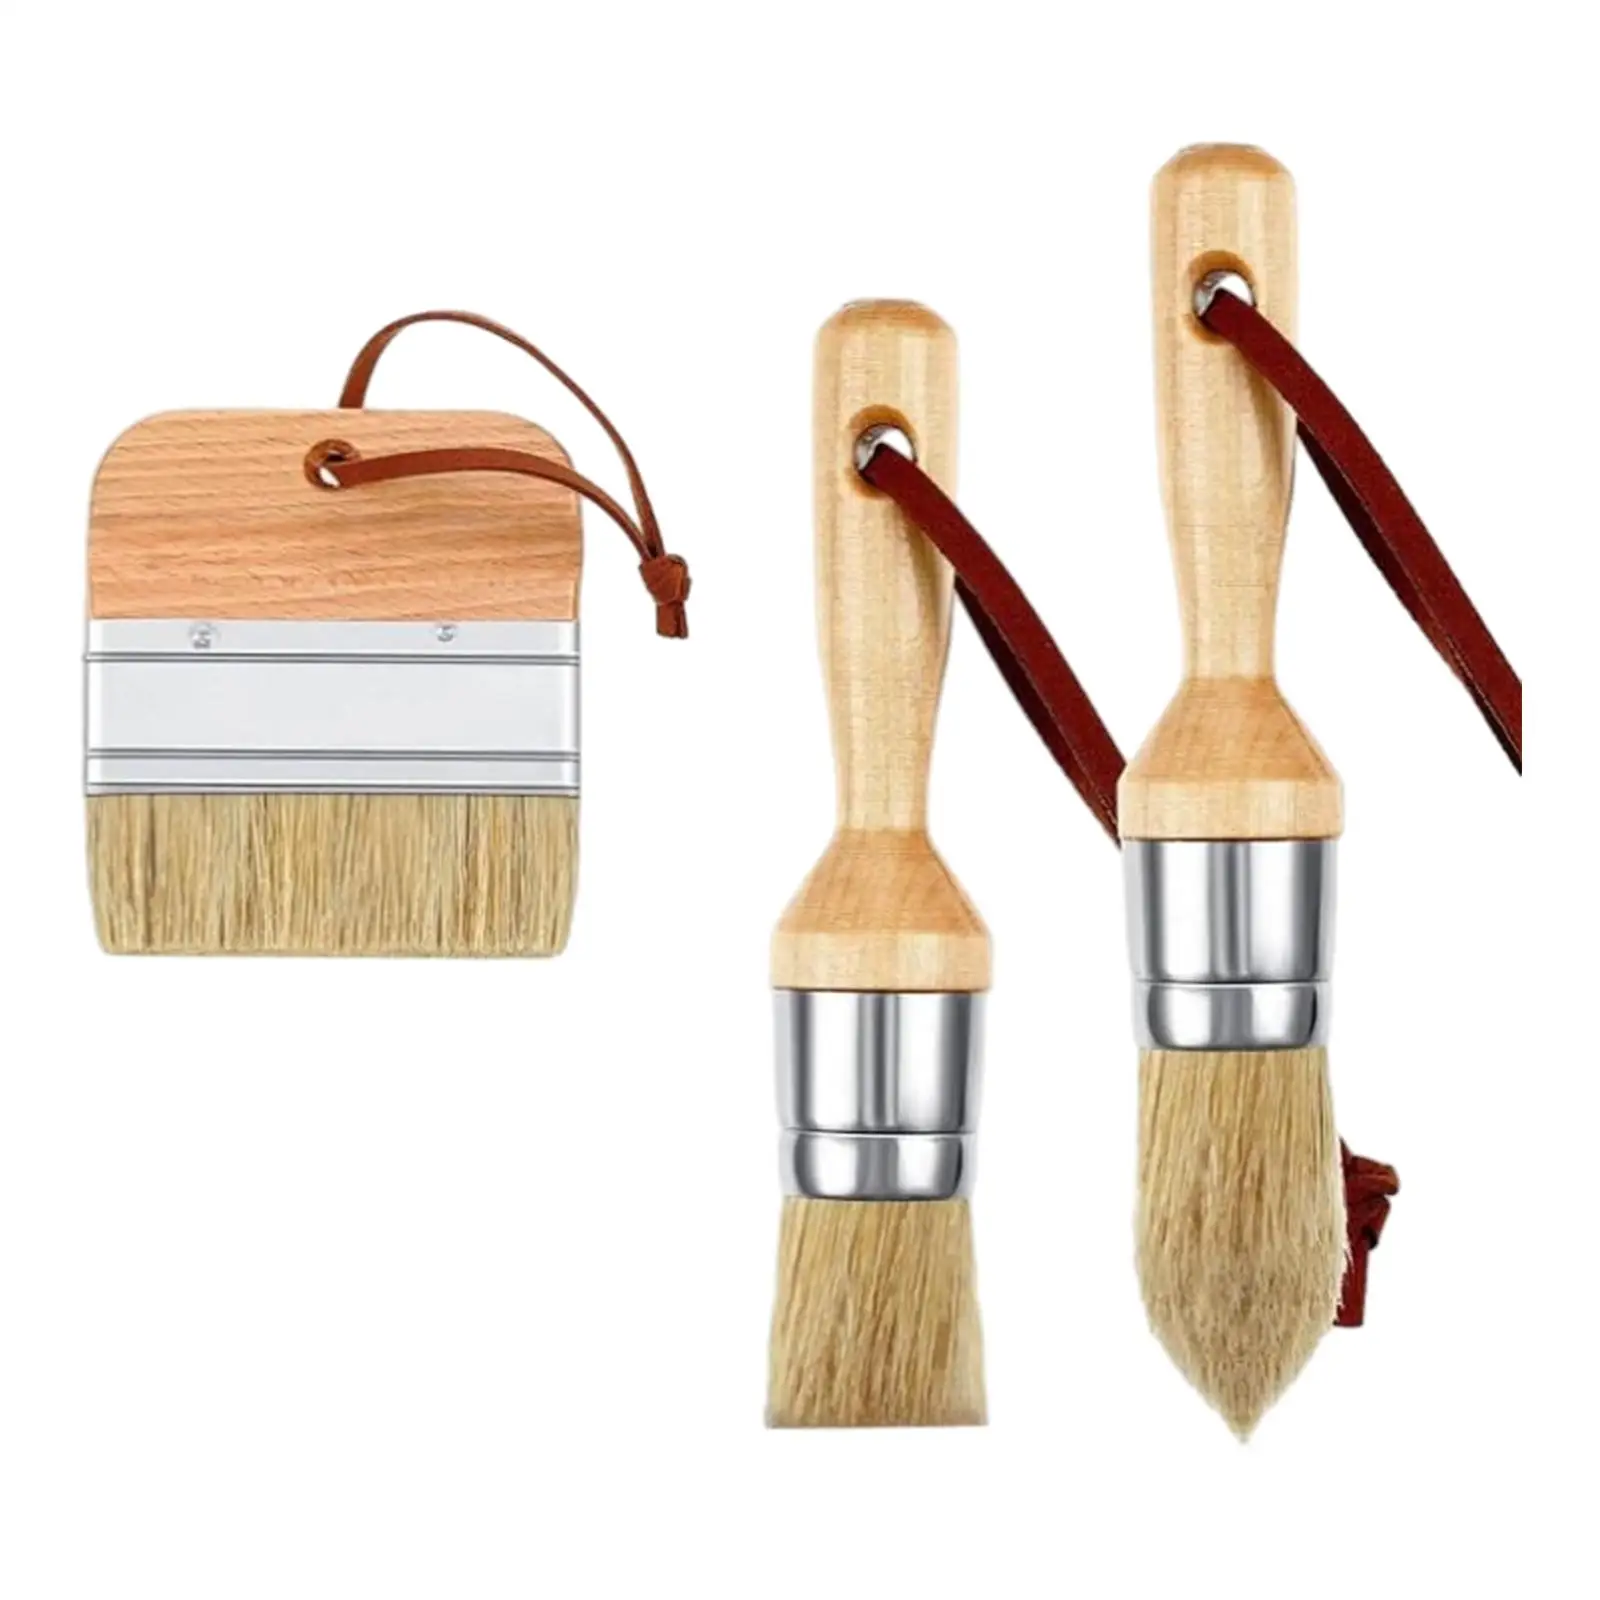 3 Pieces Chalk and Wax Paint Brushes Multipurpose Easy to Use Painting Brushes for Cabinets Dressers Upholstery Tables Ceilings